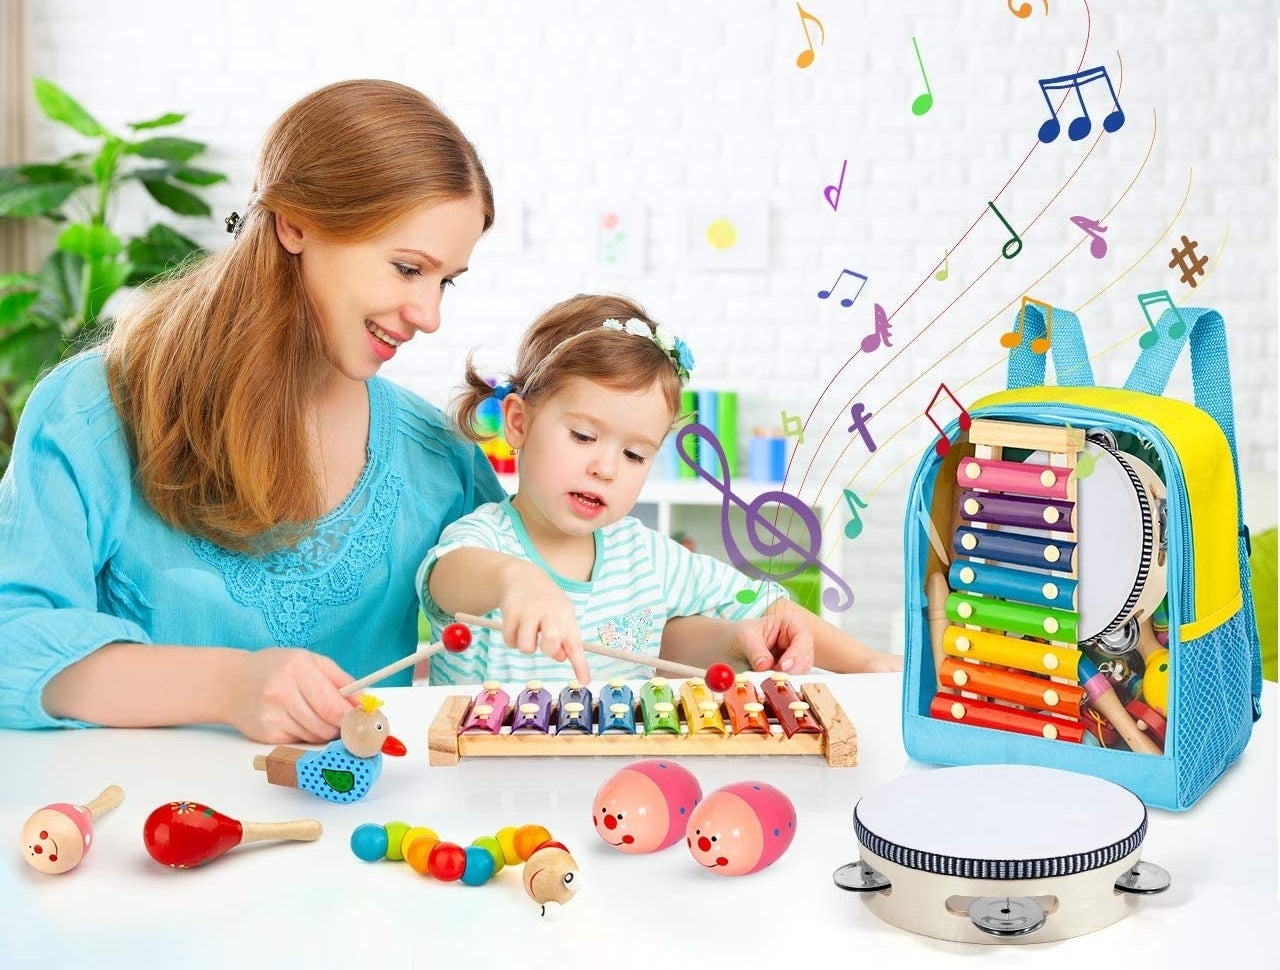 A parent and child playing with a xylophone